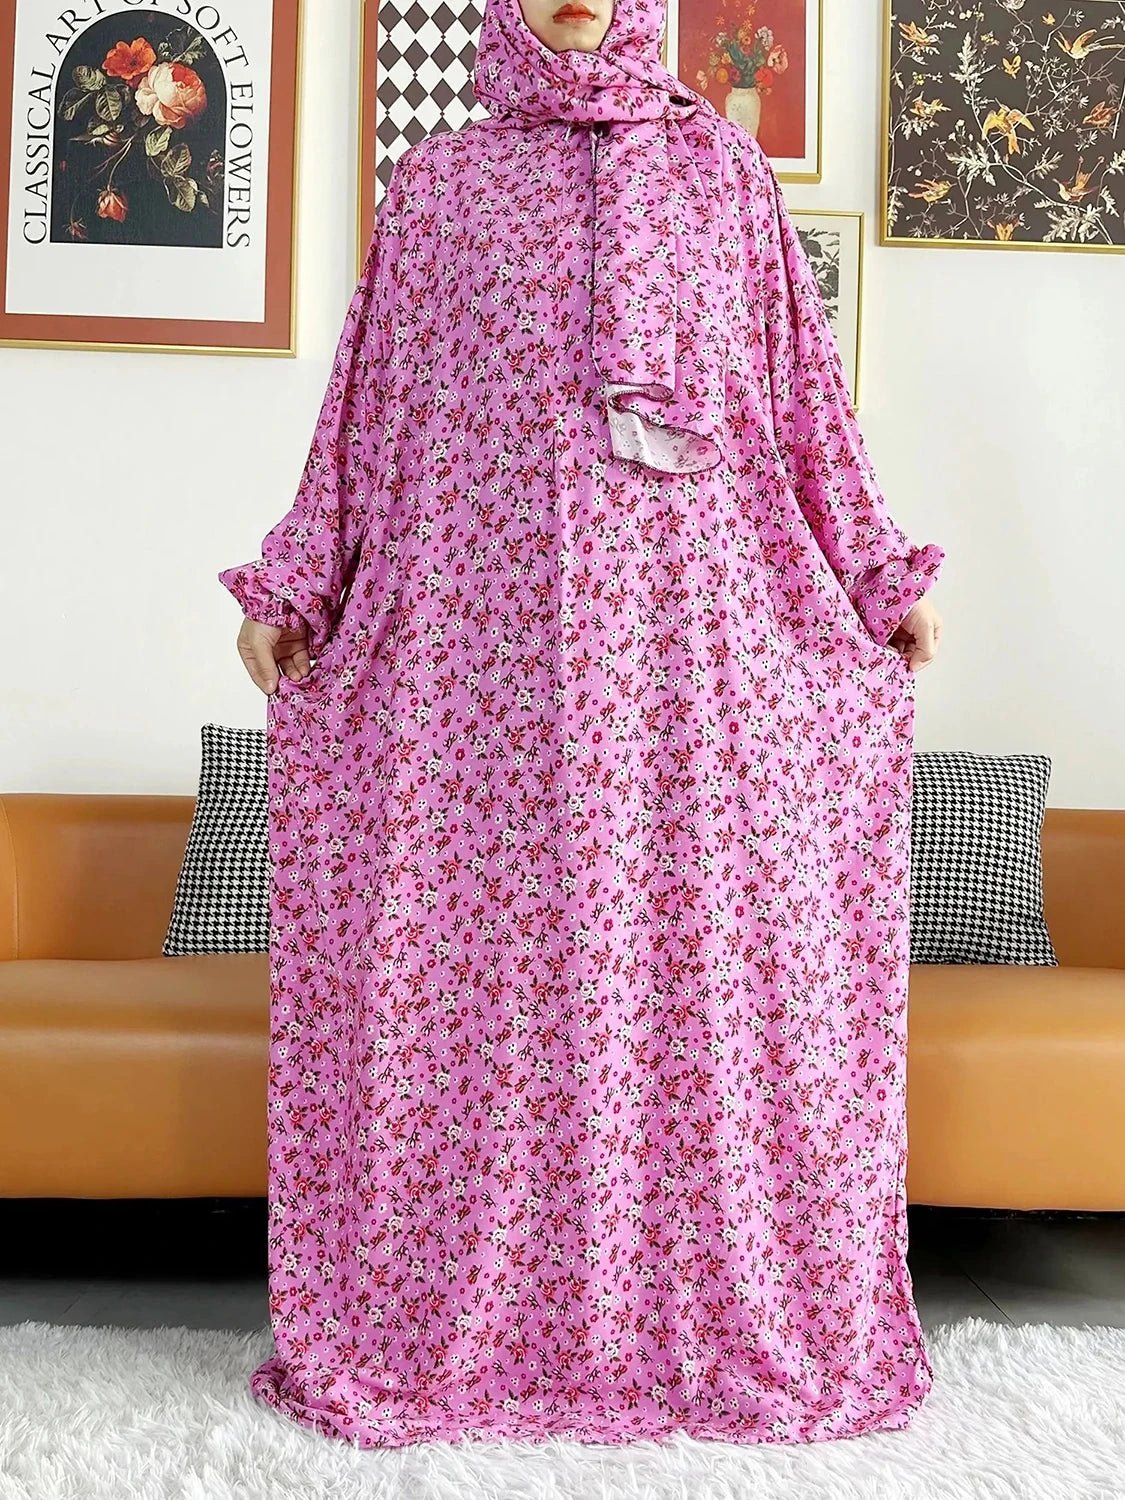 African Muslim Women Hooded Cotton Prayer Garment Kaftan With Hijab Floral Prints - Flexi Africa - Flexi Africa offers Free Delivery Worldwide - Vibrant African traditional clothing showcasing bold prints and intricate designs